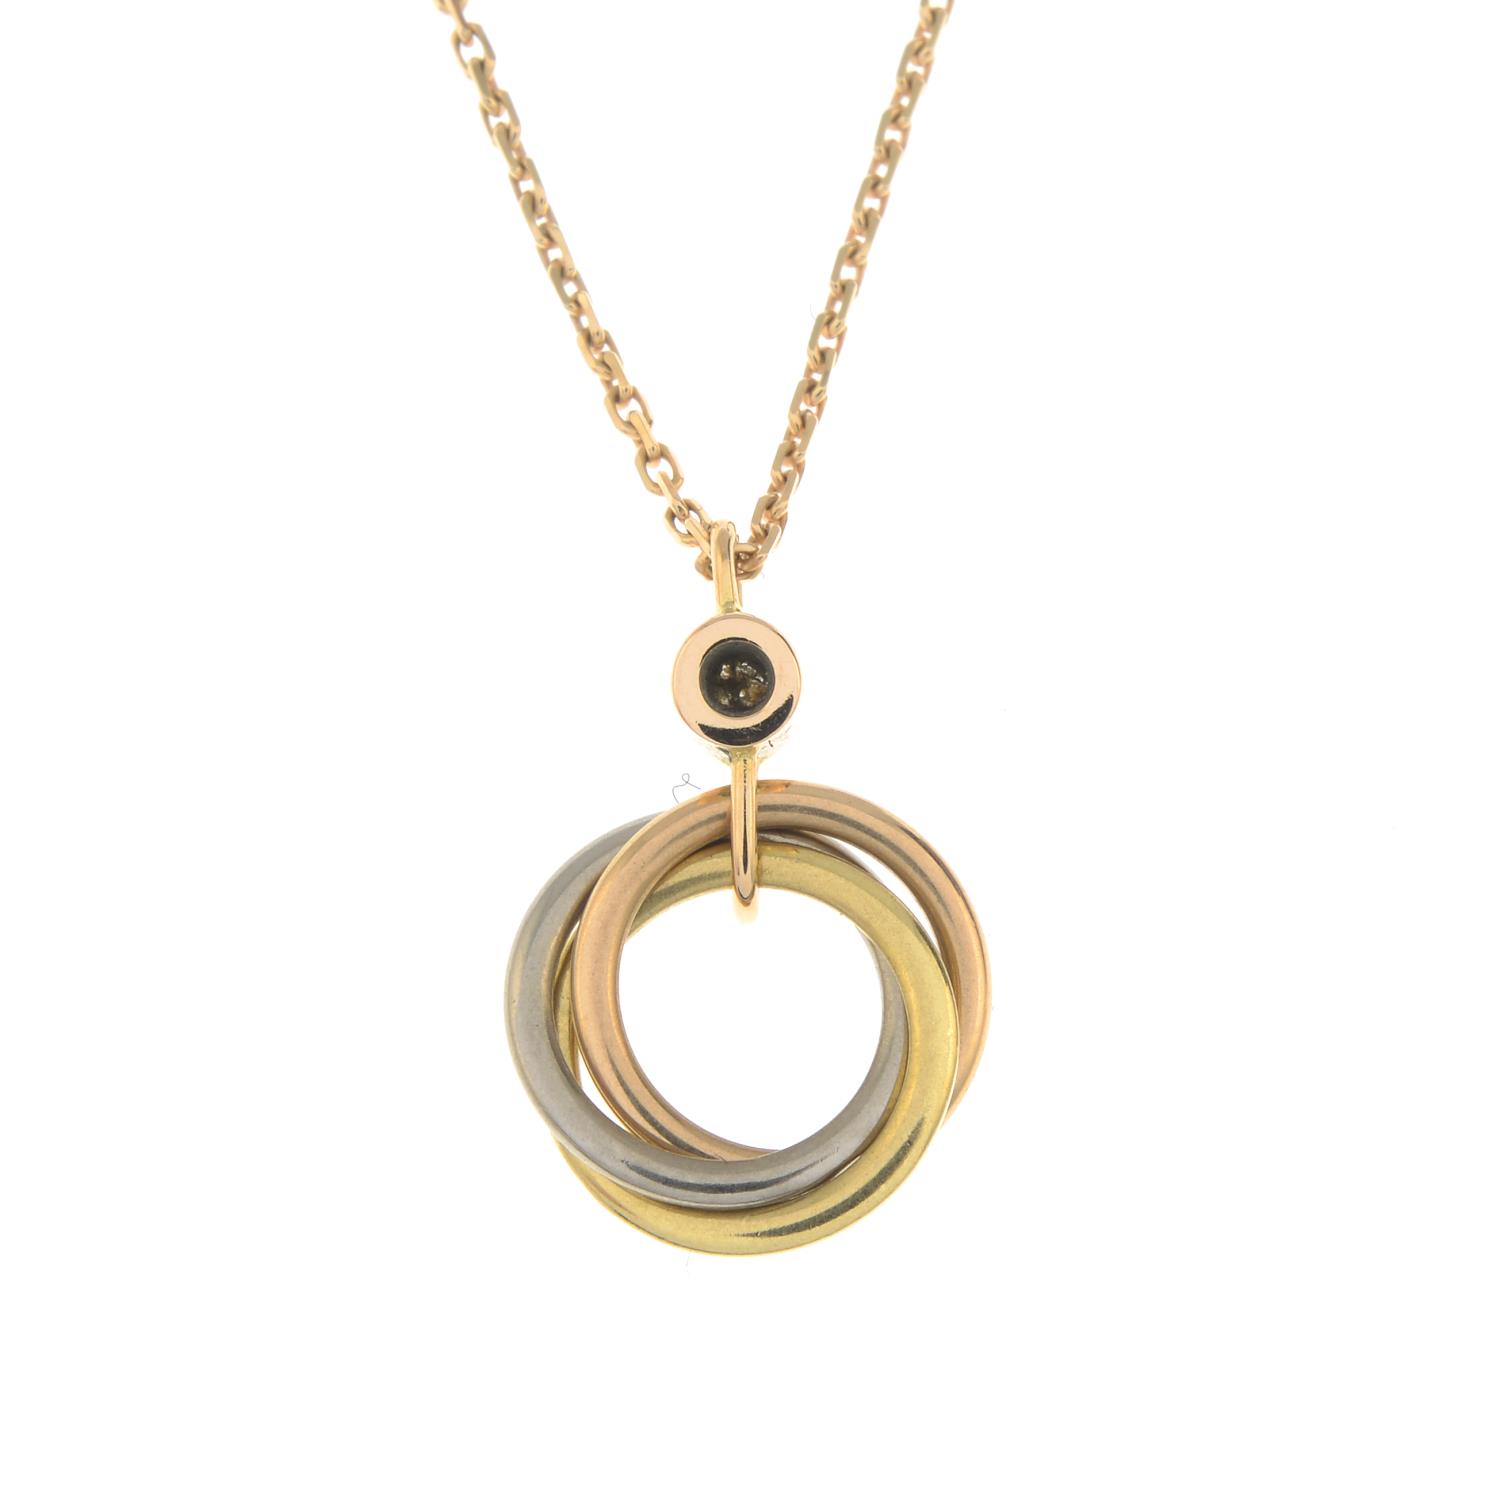 CARTIER - an 18ct gold diamond 'Trinity' pendant, on chain. - Image 2 of 4